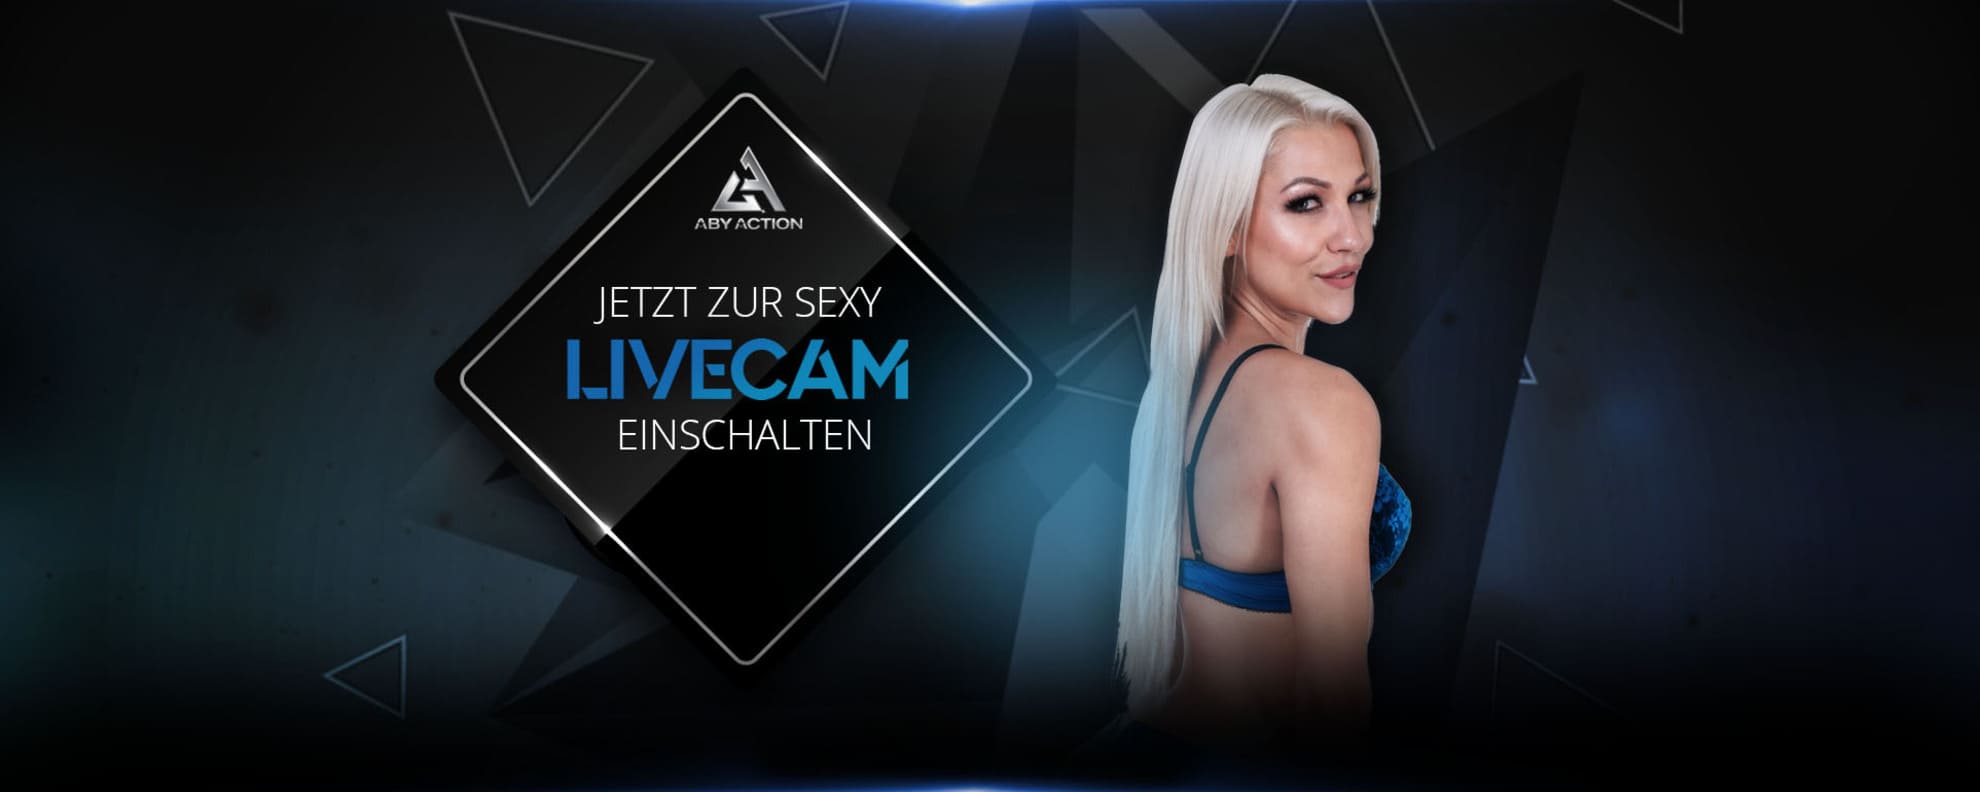 Aby Action Livecam